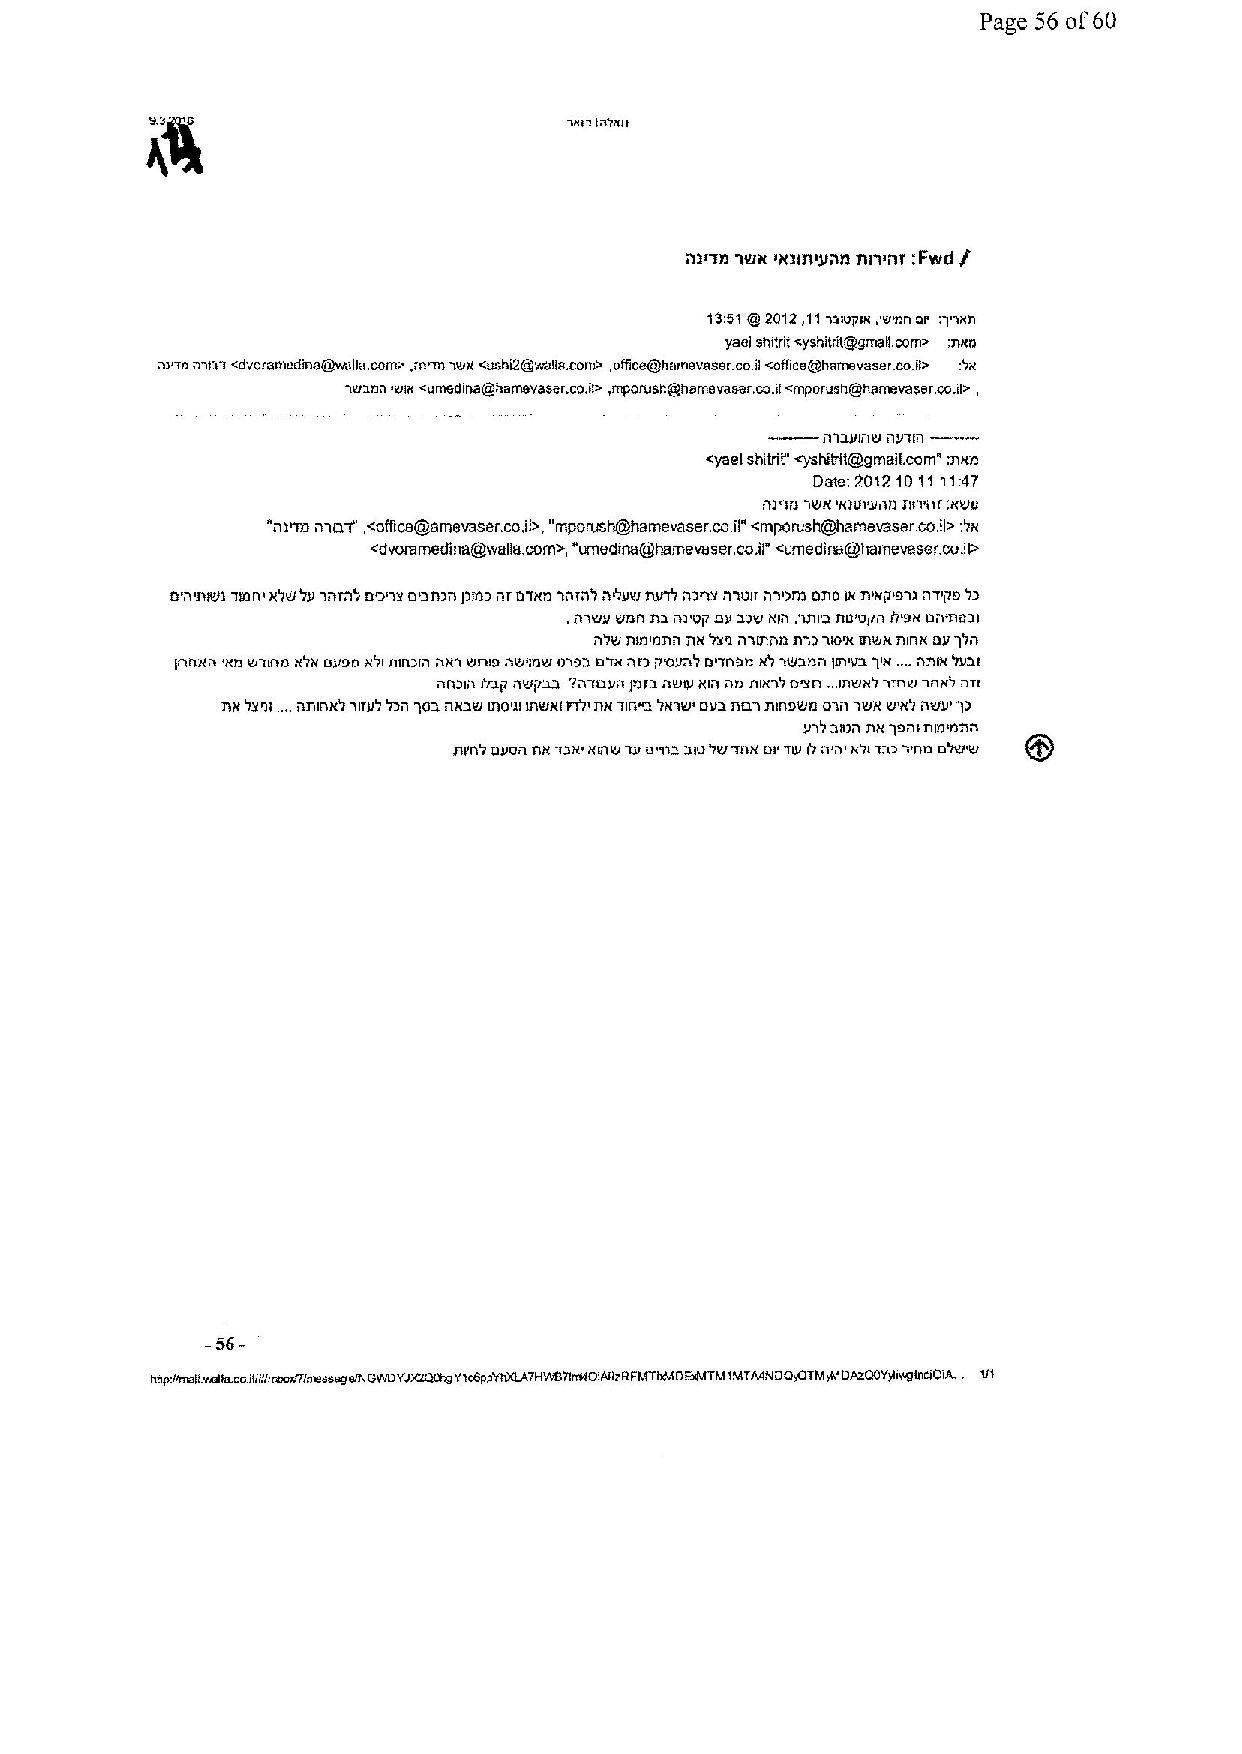 document-page-056